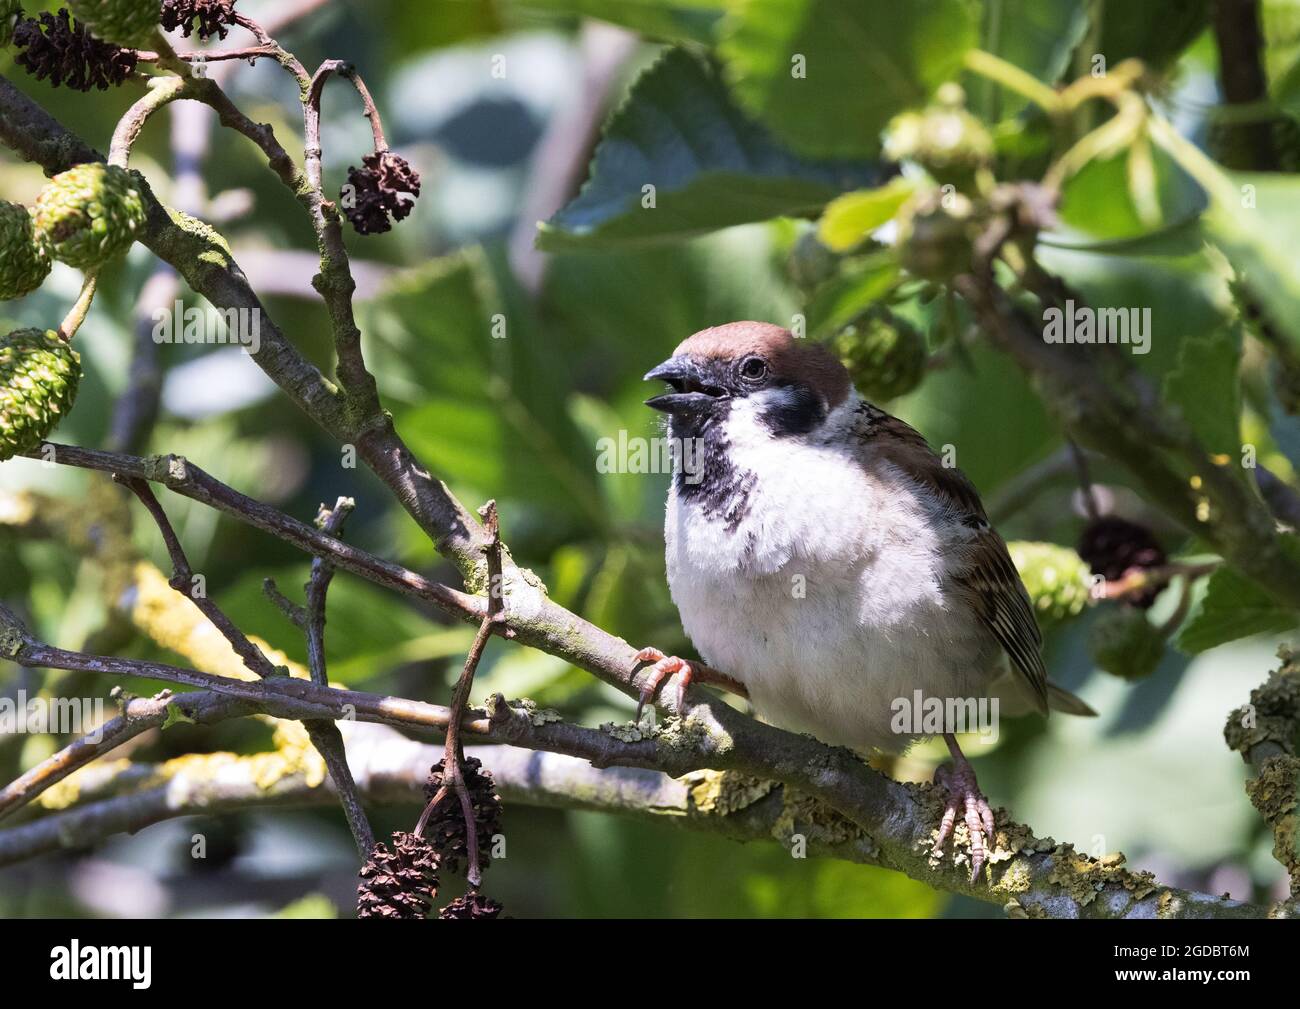 Tree sparrow UK; An adult Eurasion tree sparrow, Passer montanus, perched in a tree, Yorkshire, UK Stock Photo